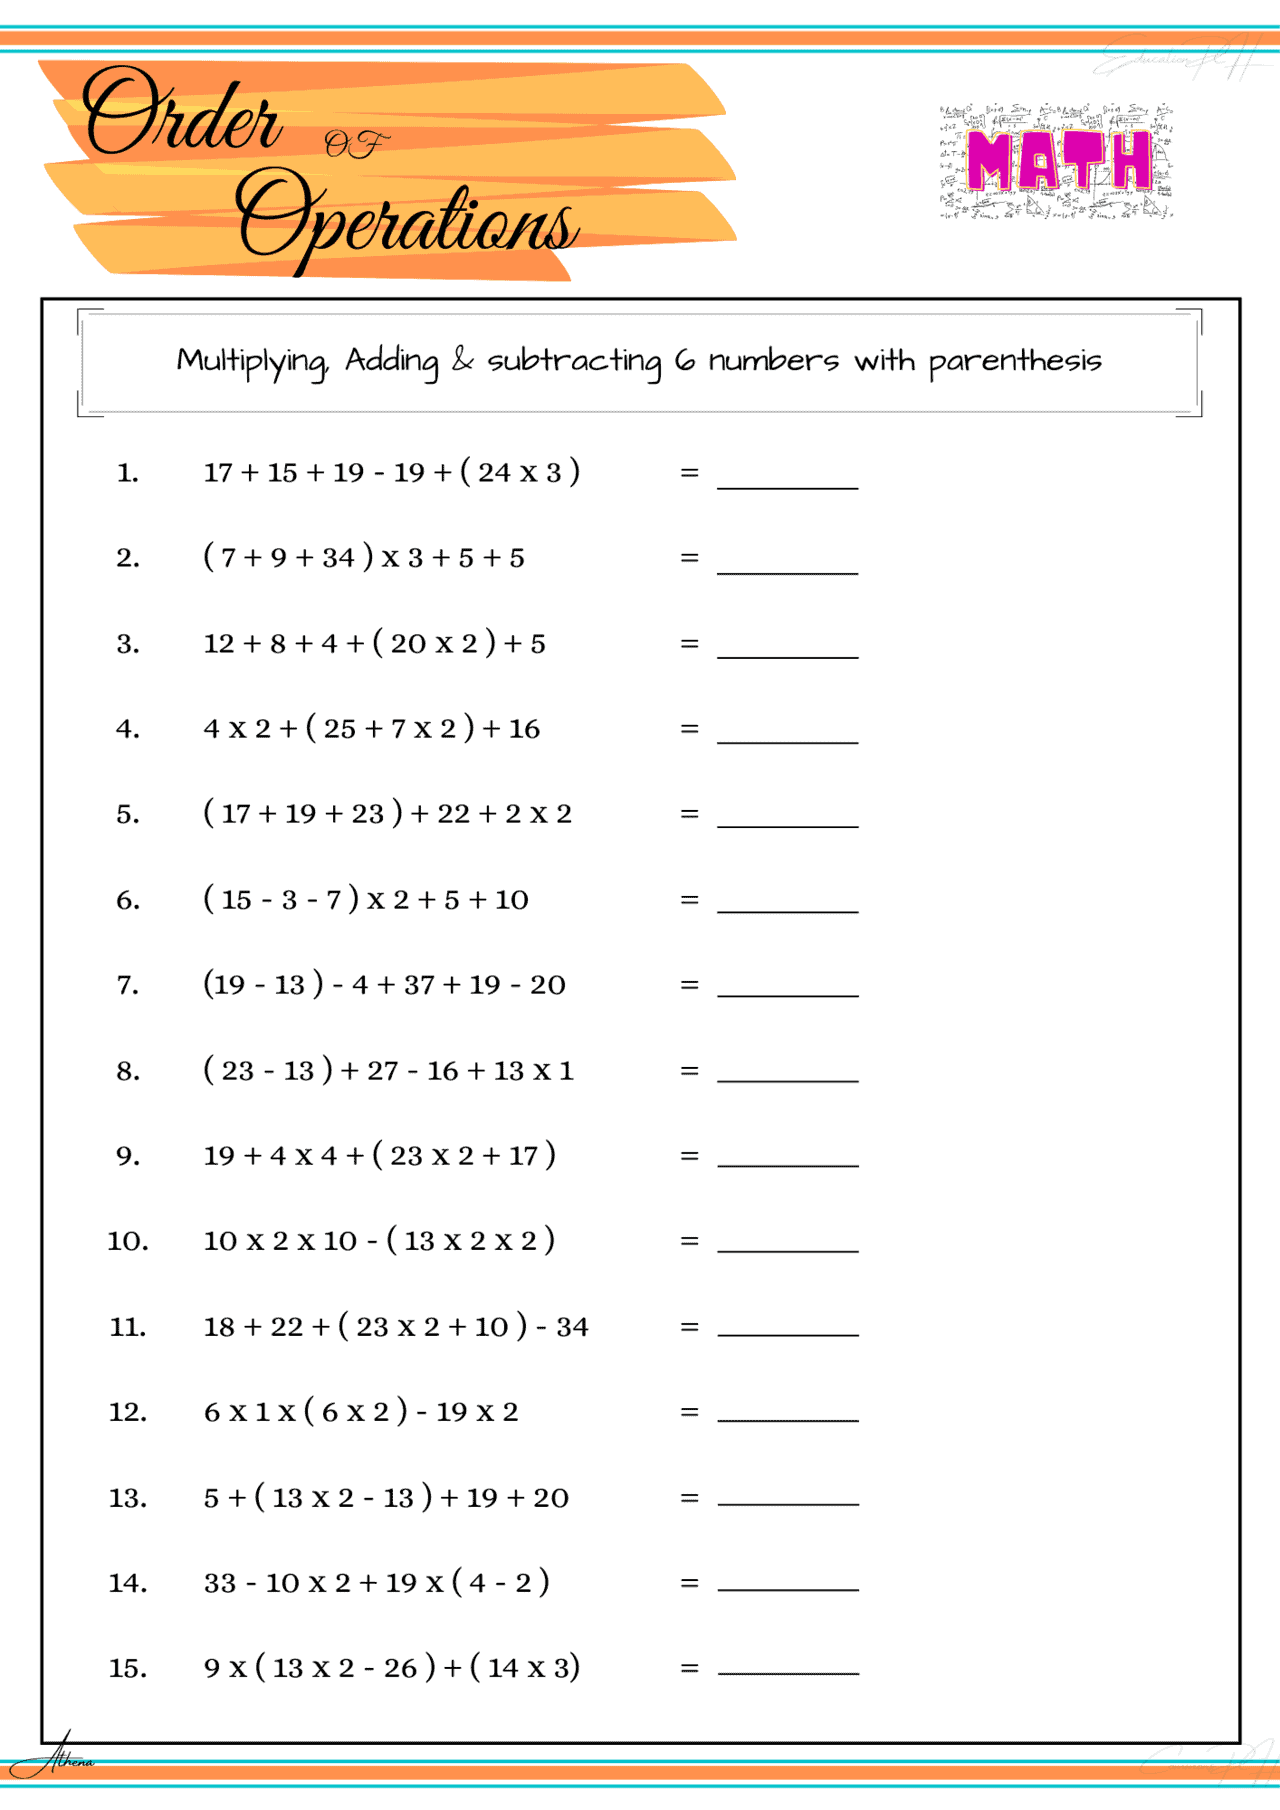 rational-number-operations-worksheets